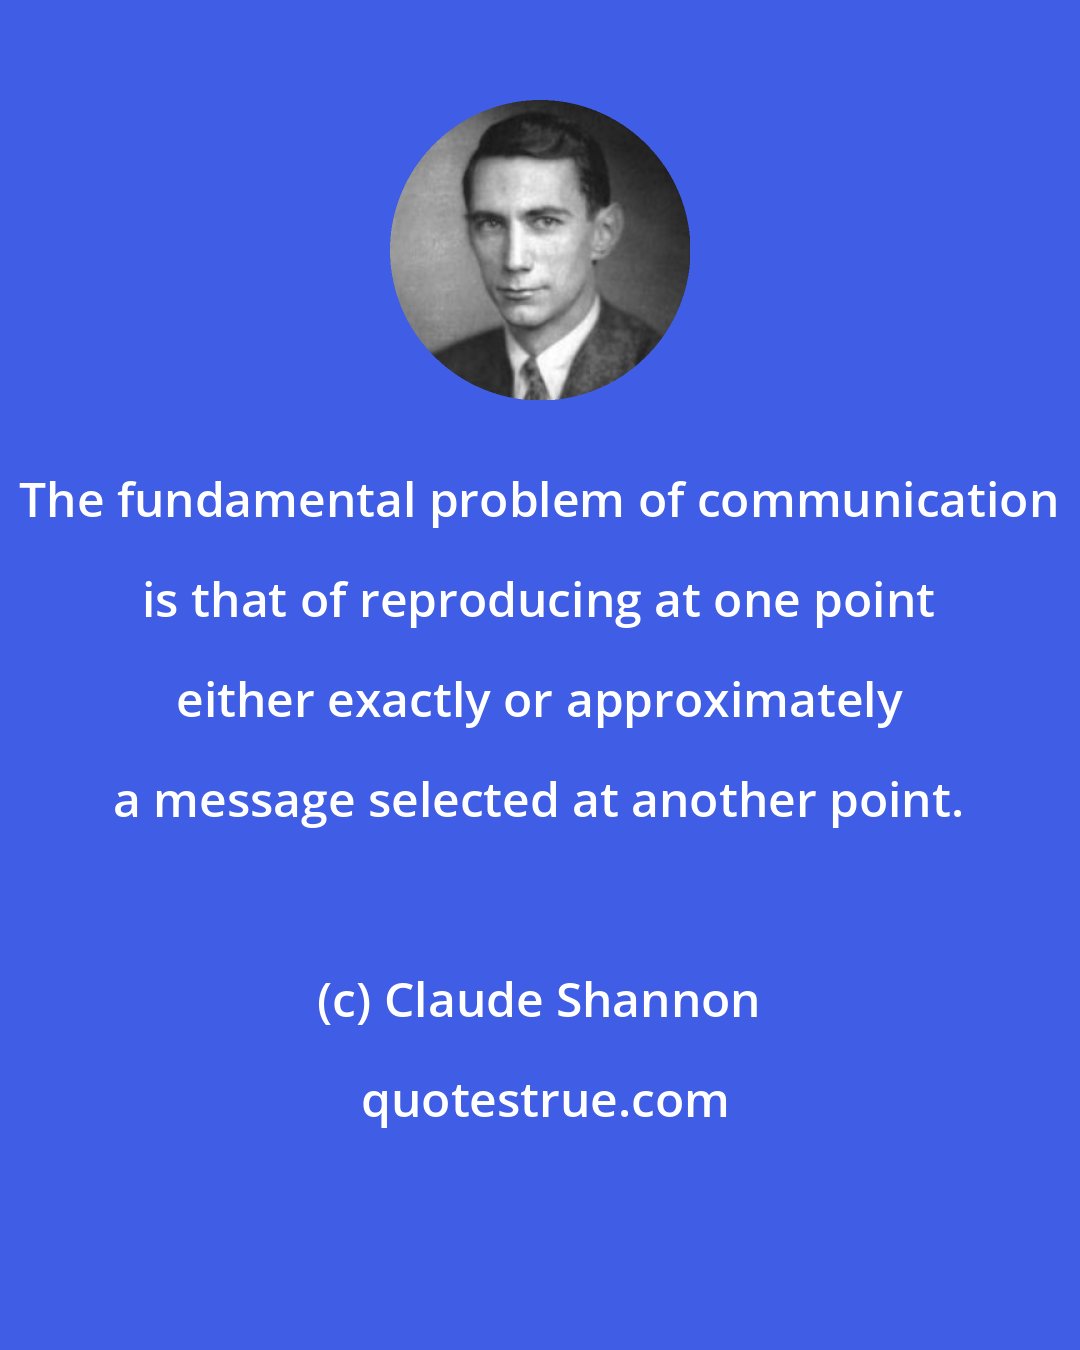 Claude Shannon: The fundamental problem of communication is that of reproducing at one point either exactly or approximately a message selected at another point.